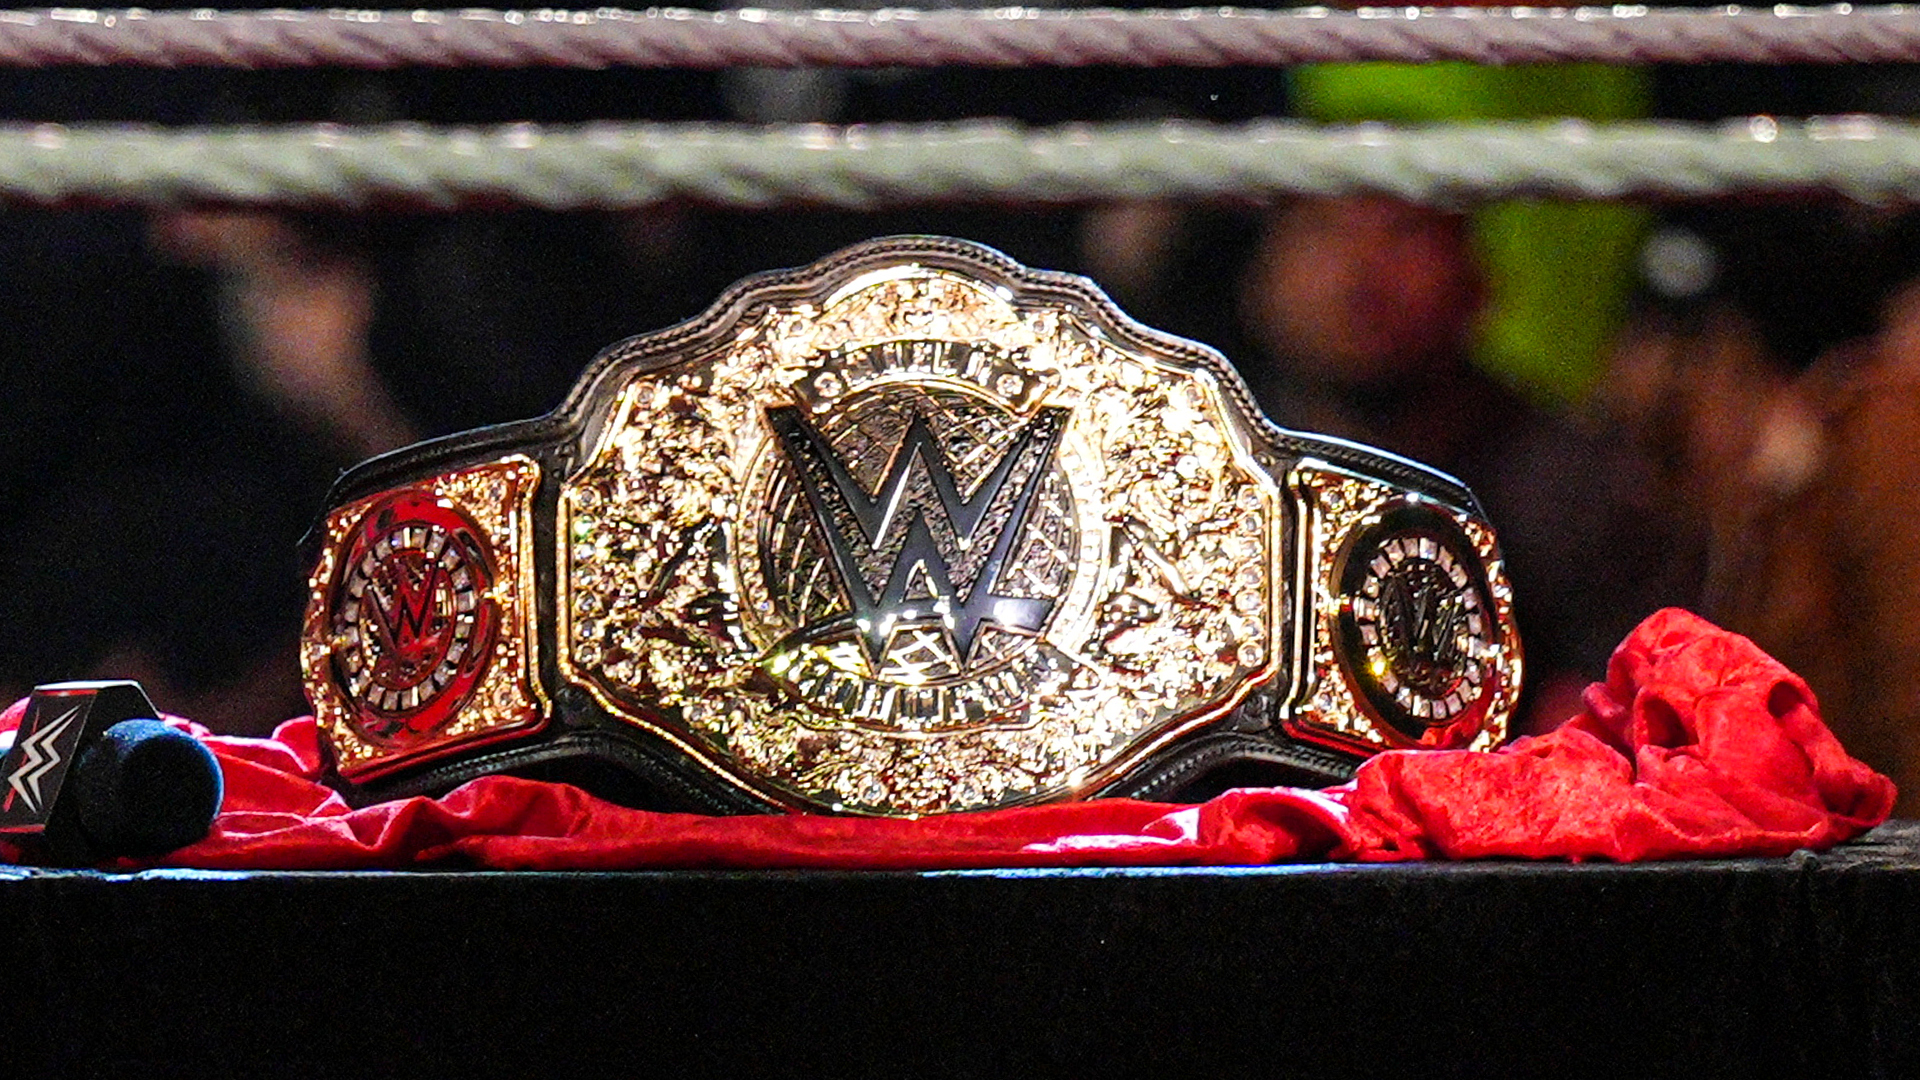 List of Every Championship Title in AEW, ROH & WWE Created, Vacated or